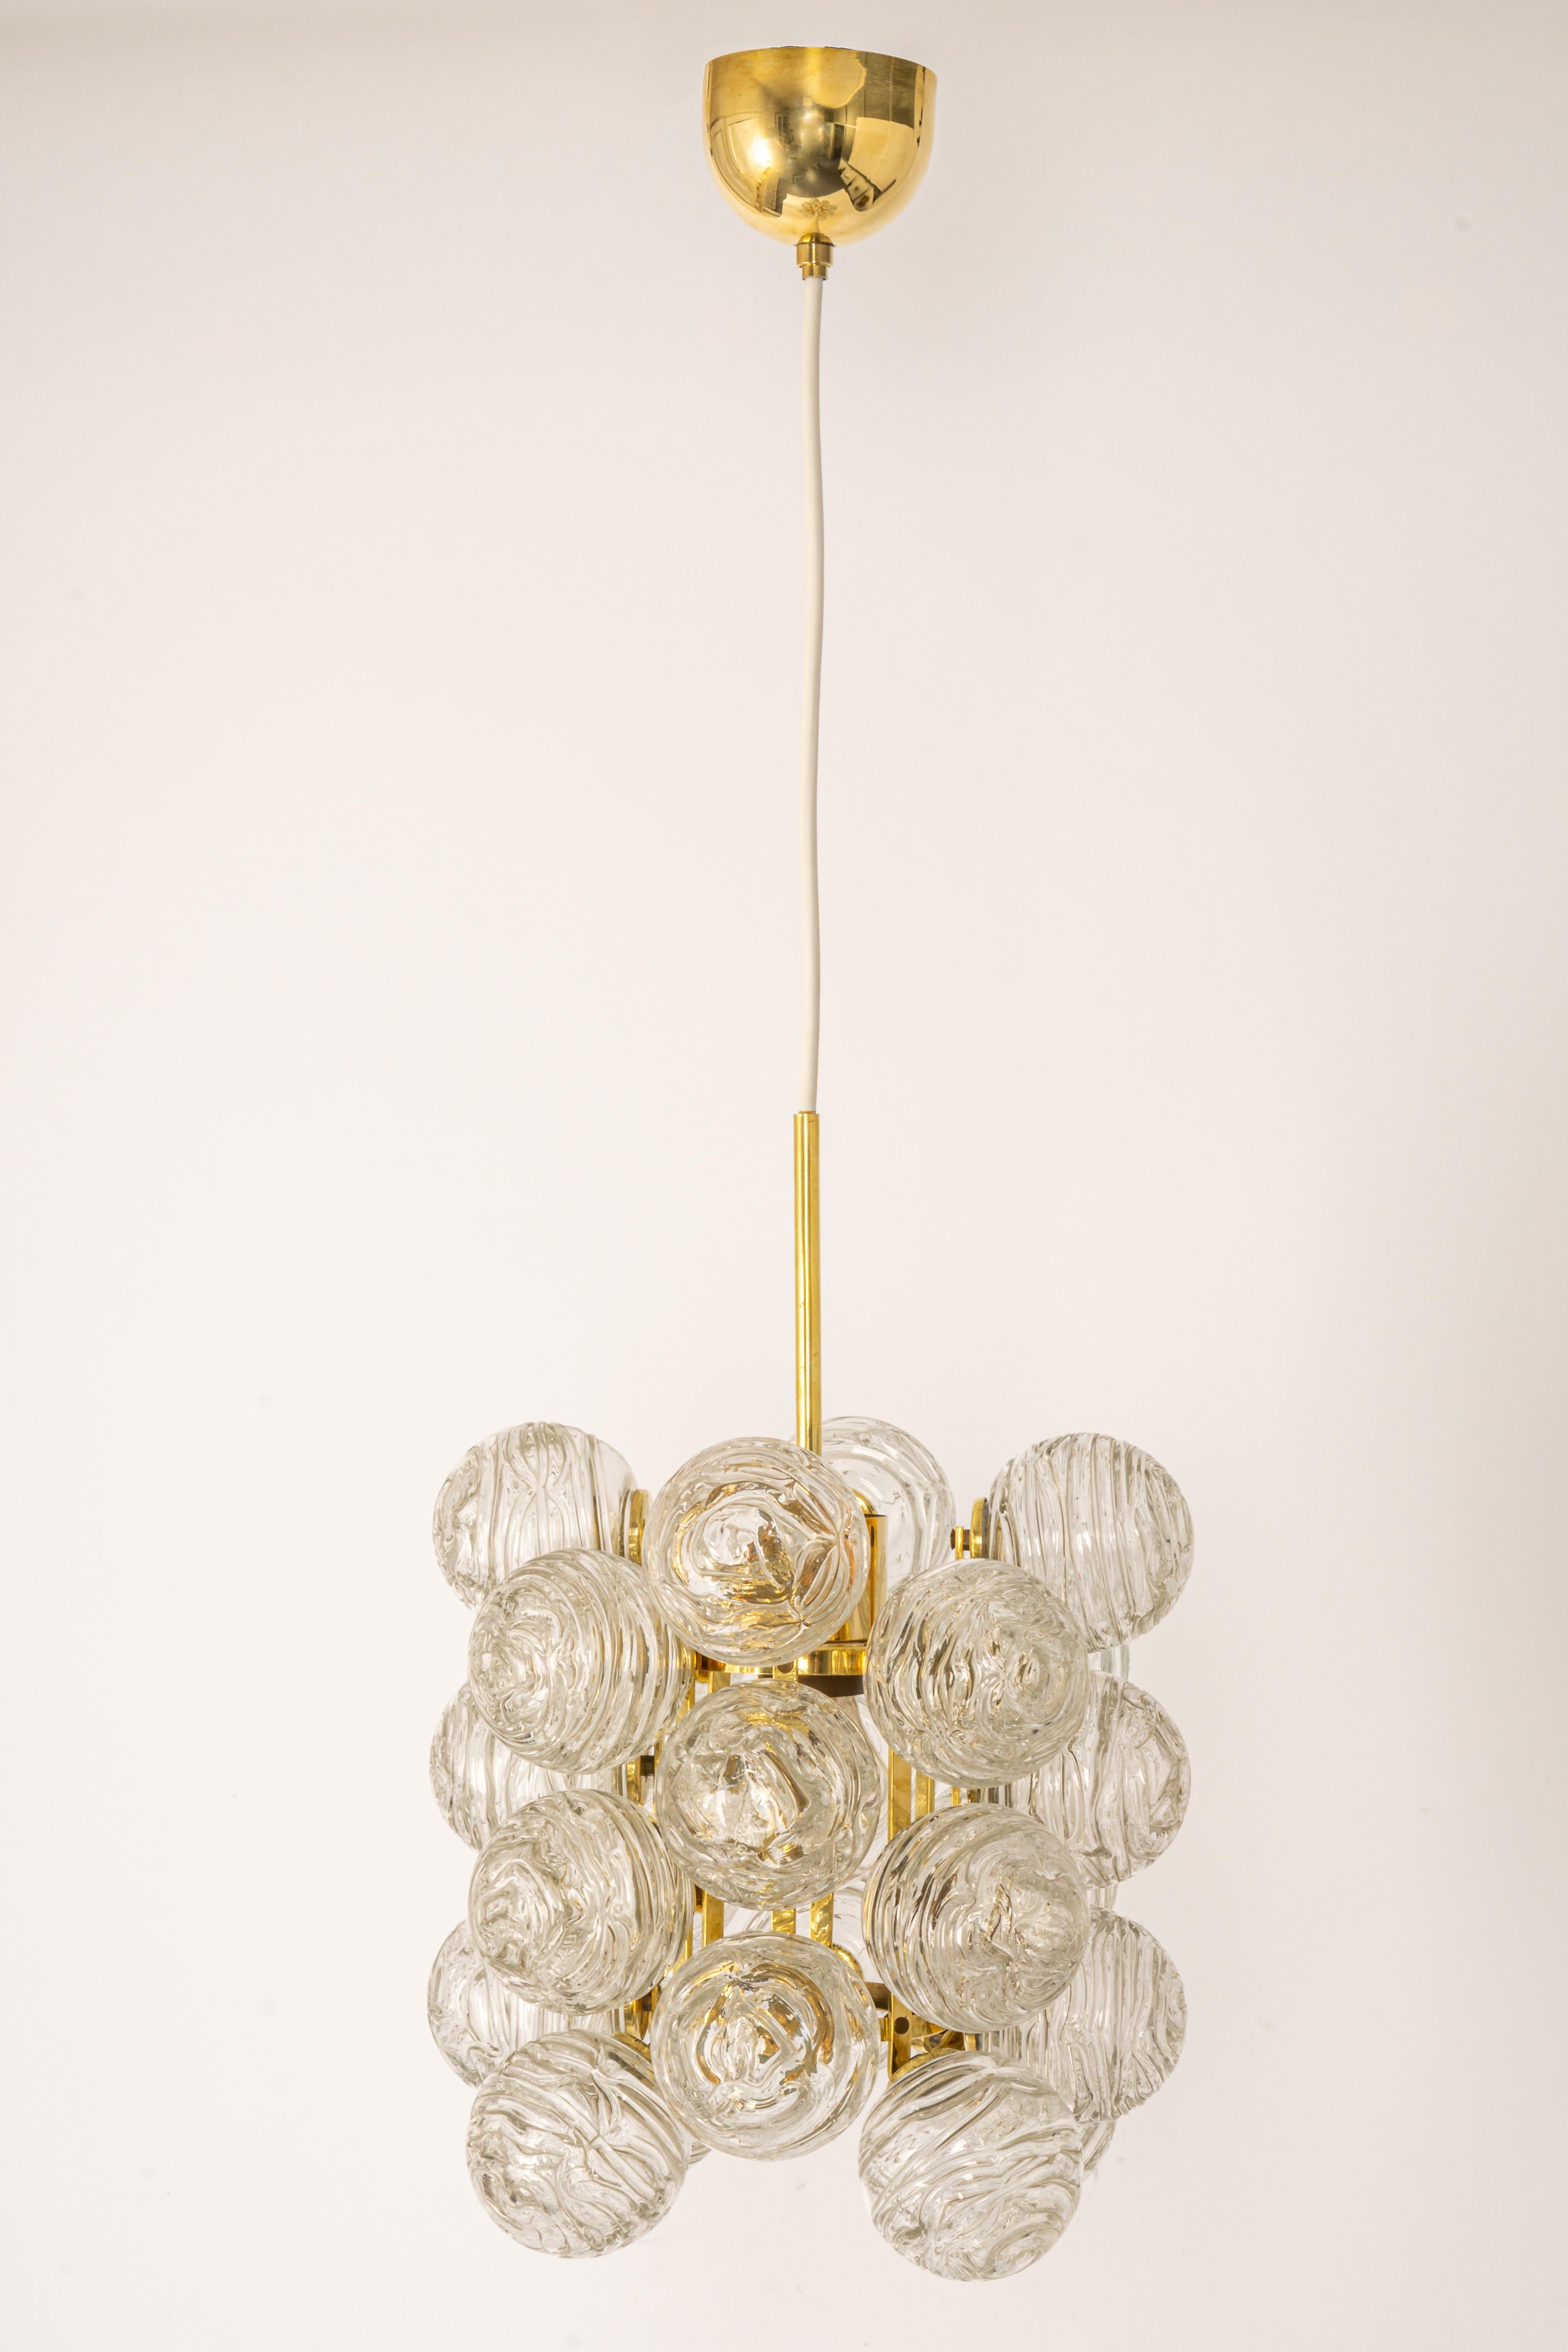 A petite midcentury pendant made by Doria Leuchtern, manufactured in Germany, circa 1970-1979.
The pendant is composed of many Murano glass swirl textured glass elements (snowballs) attached to a brass frame.

Sockets: 1 x E27 standard bulb. (Up to